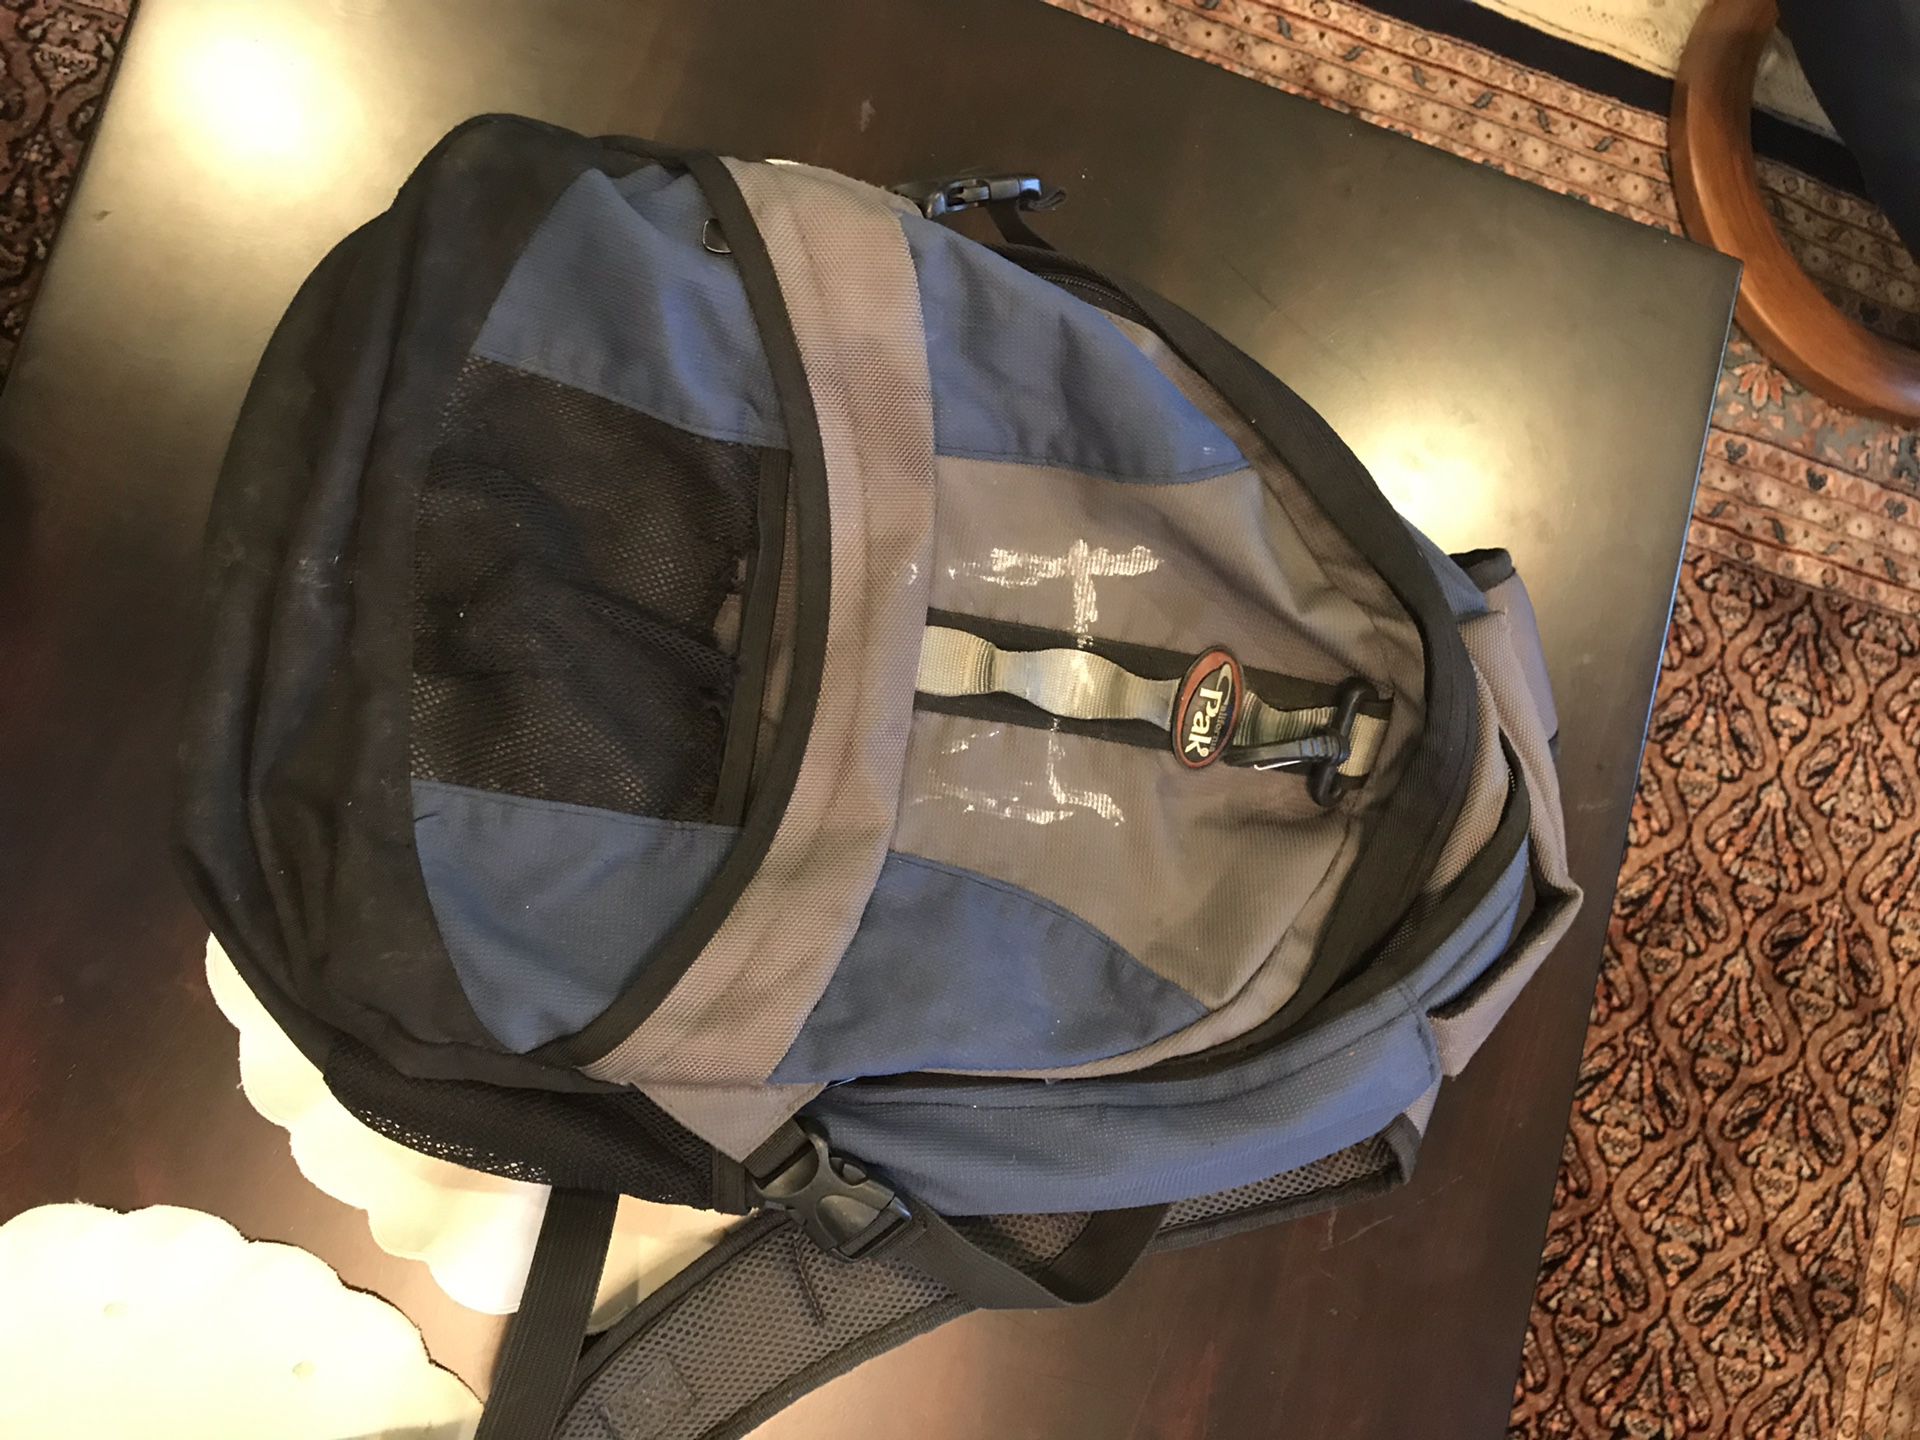 BACKPACK - nice padding for the back